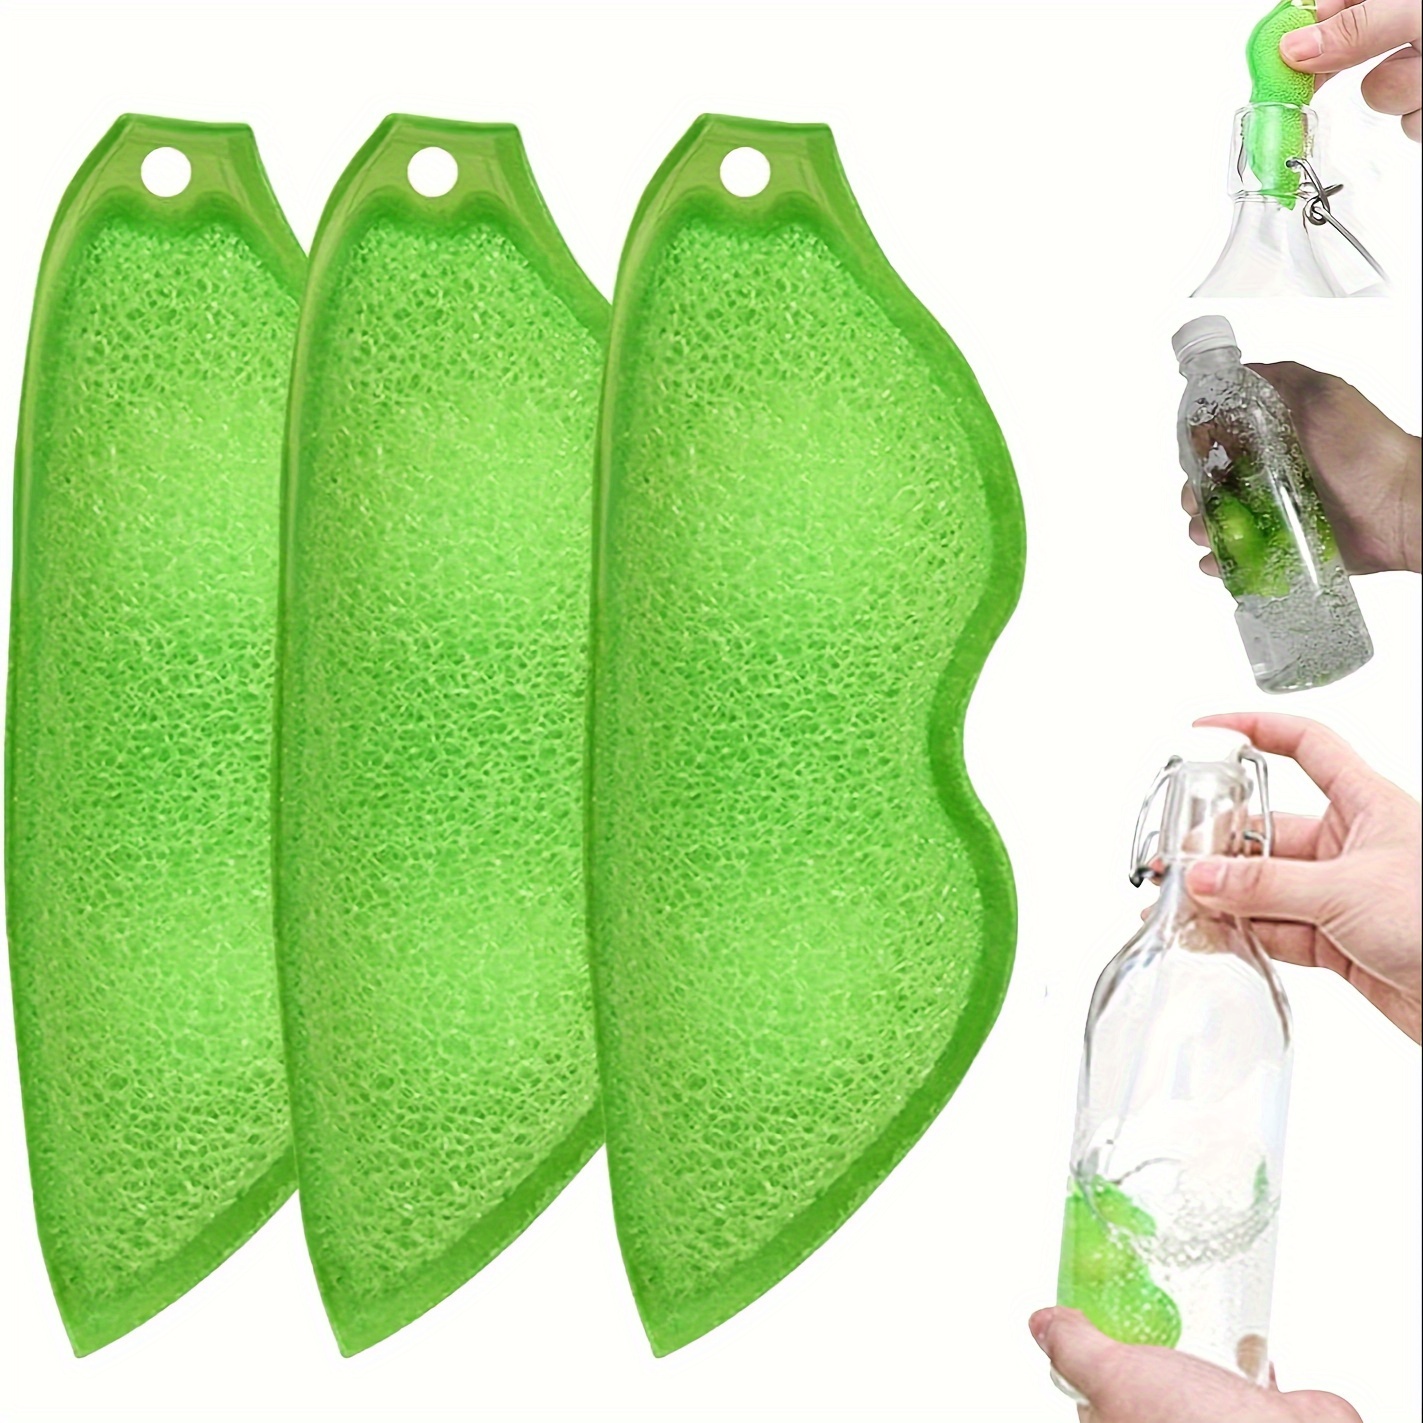 Magic Beans Bottle Cleaner, Reuseable Bottle Cleaning Sponge, Beans-Shaped  Bottle Cleaning Sponge, Dishwashing for Coffee Glasses Pot Cup (6PC)